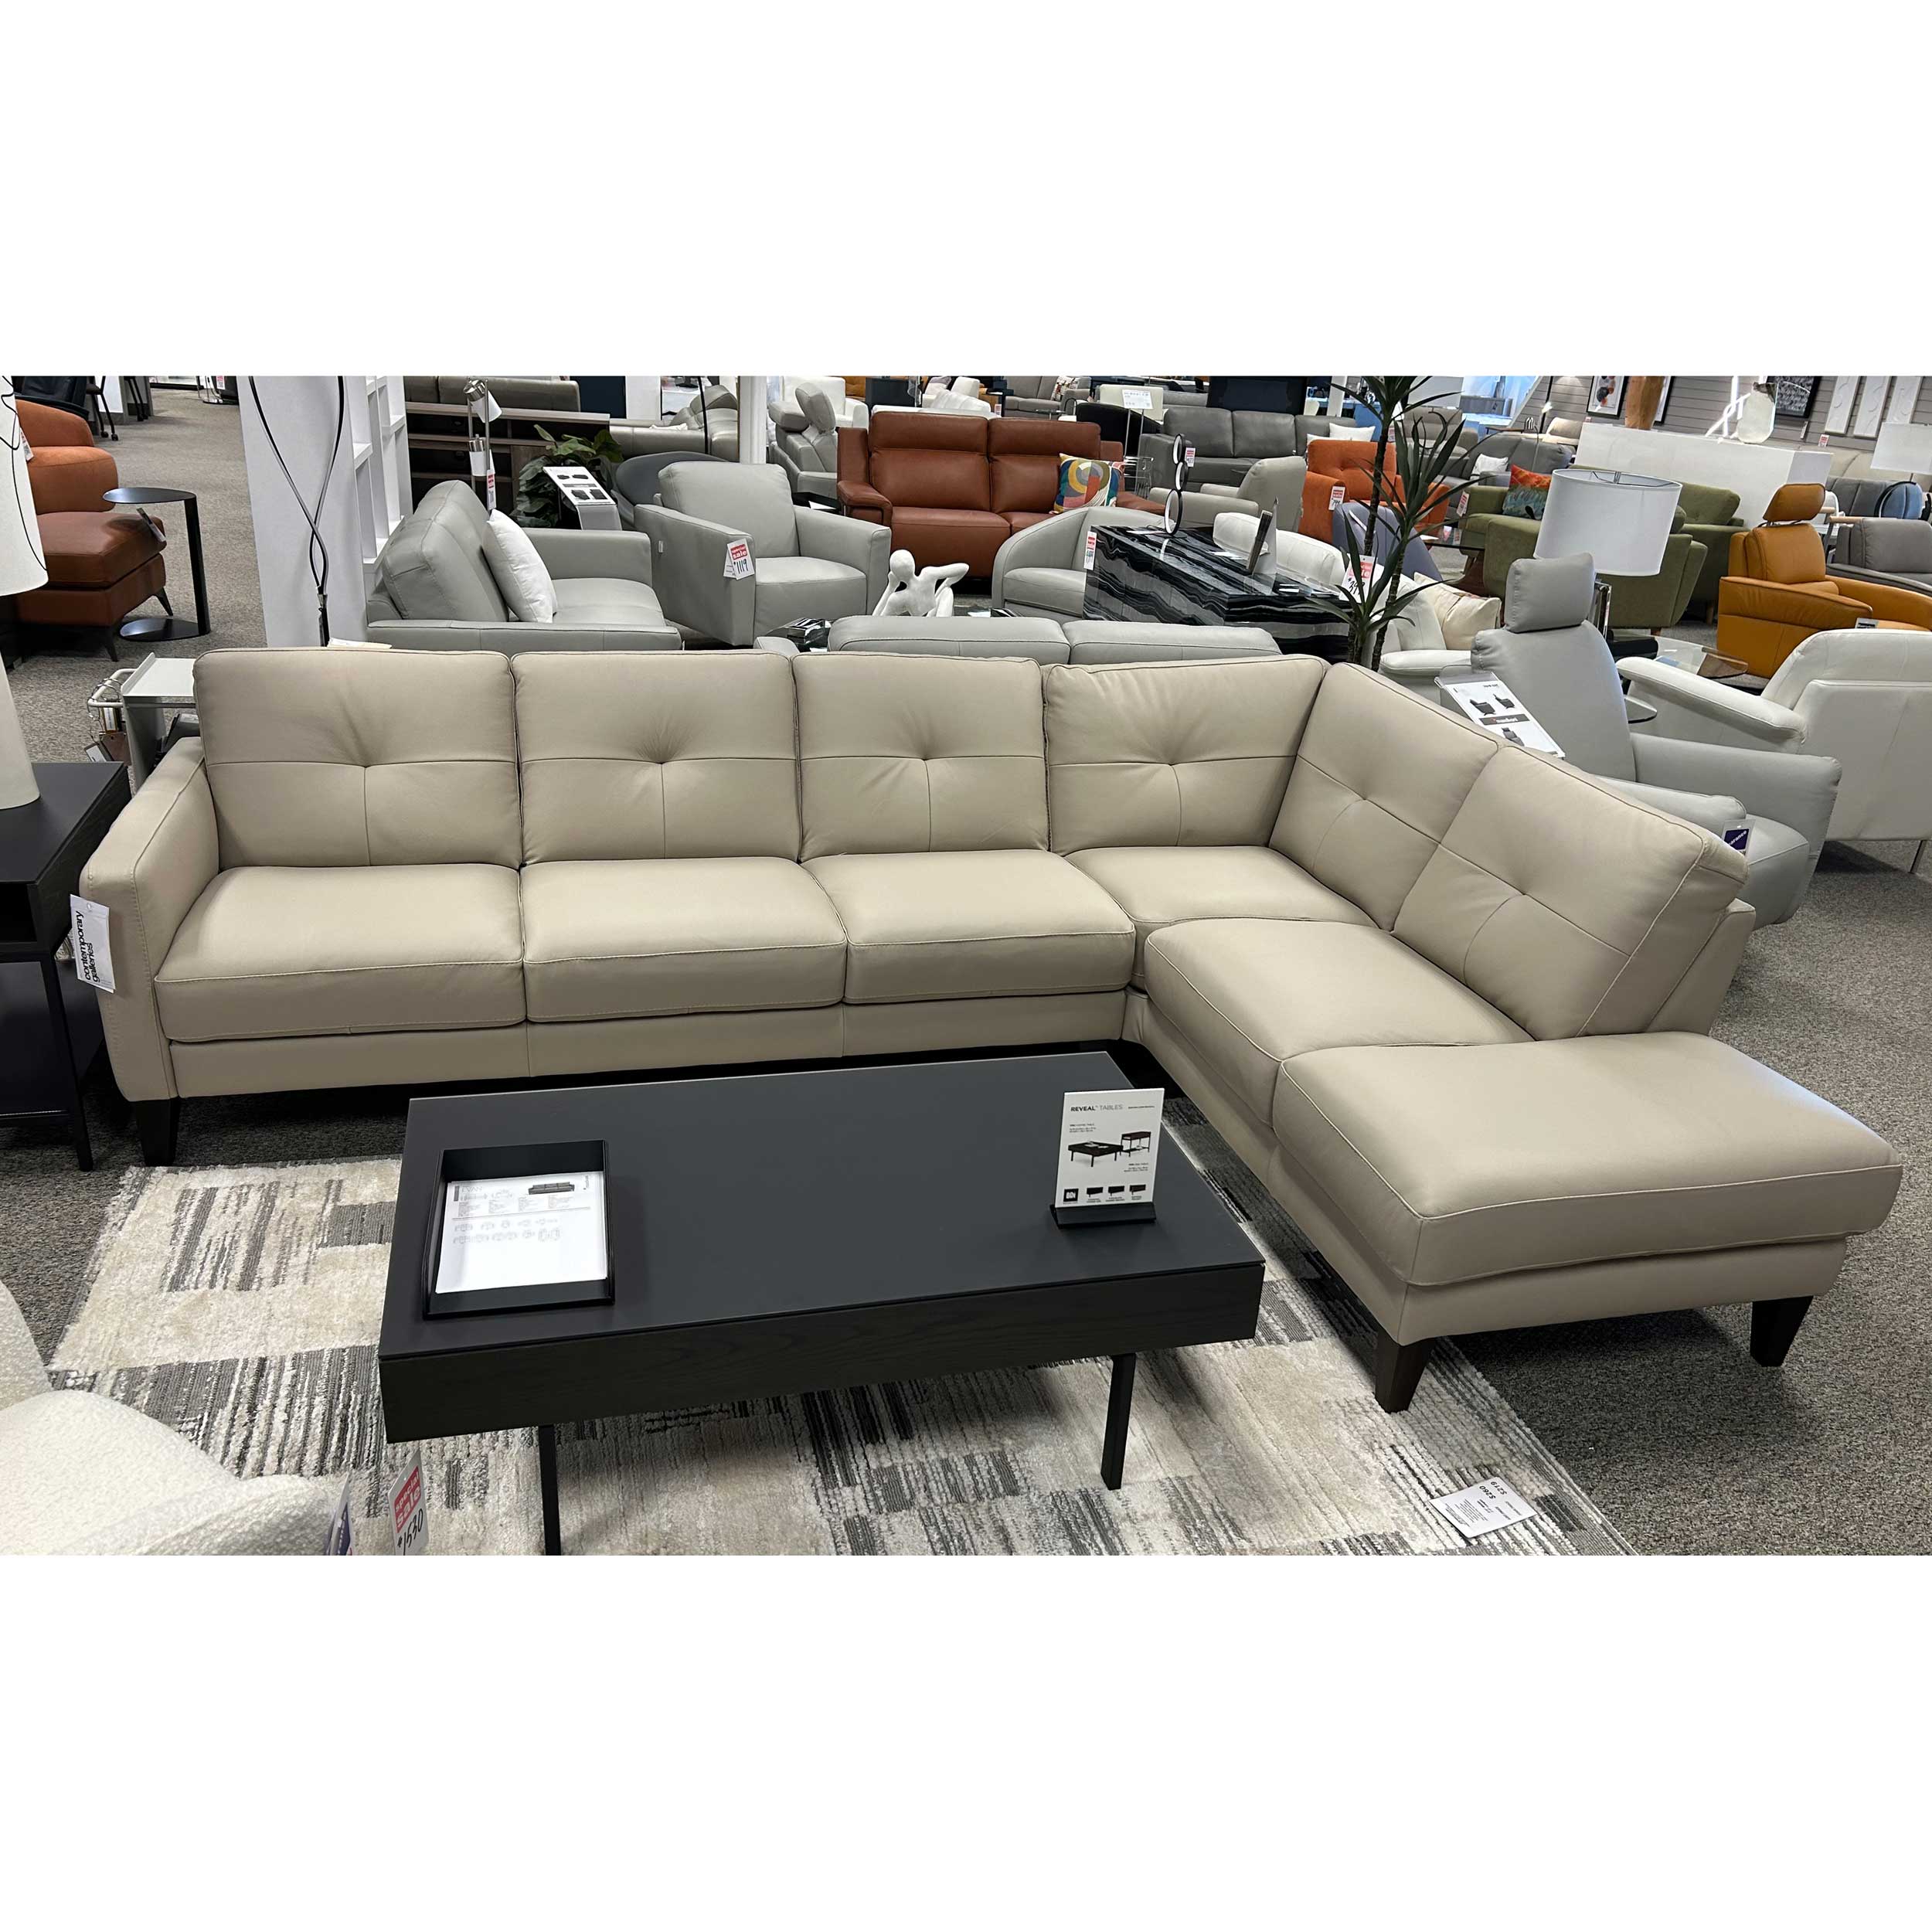 Max_Divani_Evan_Taupe_Leather_Sectional